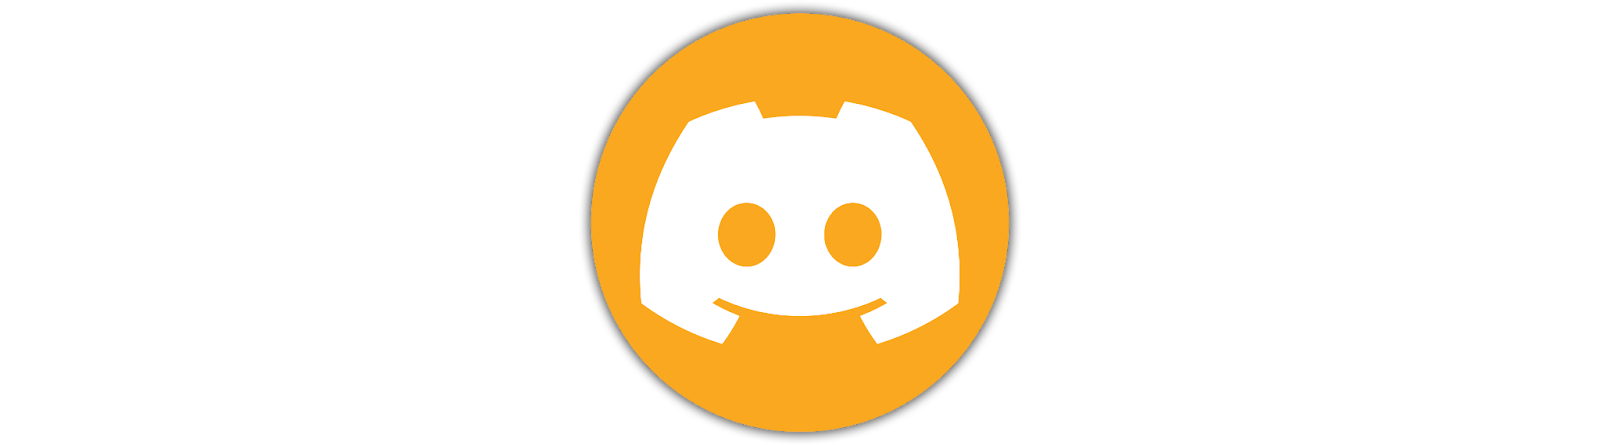 Discord Canary's logo. Unlike the regular blurple color, Canary logo is bee yellow